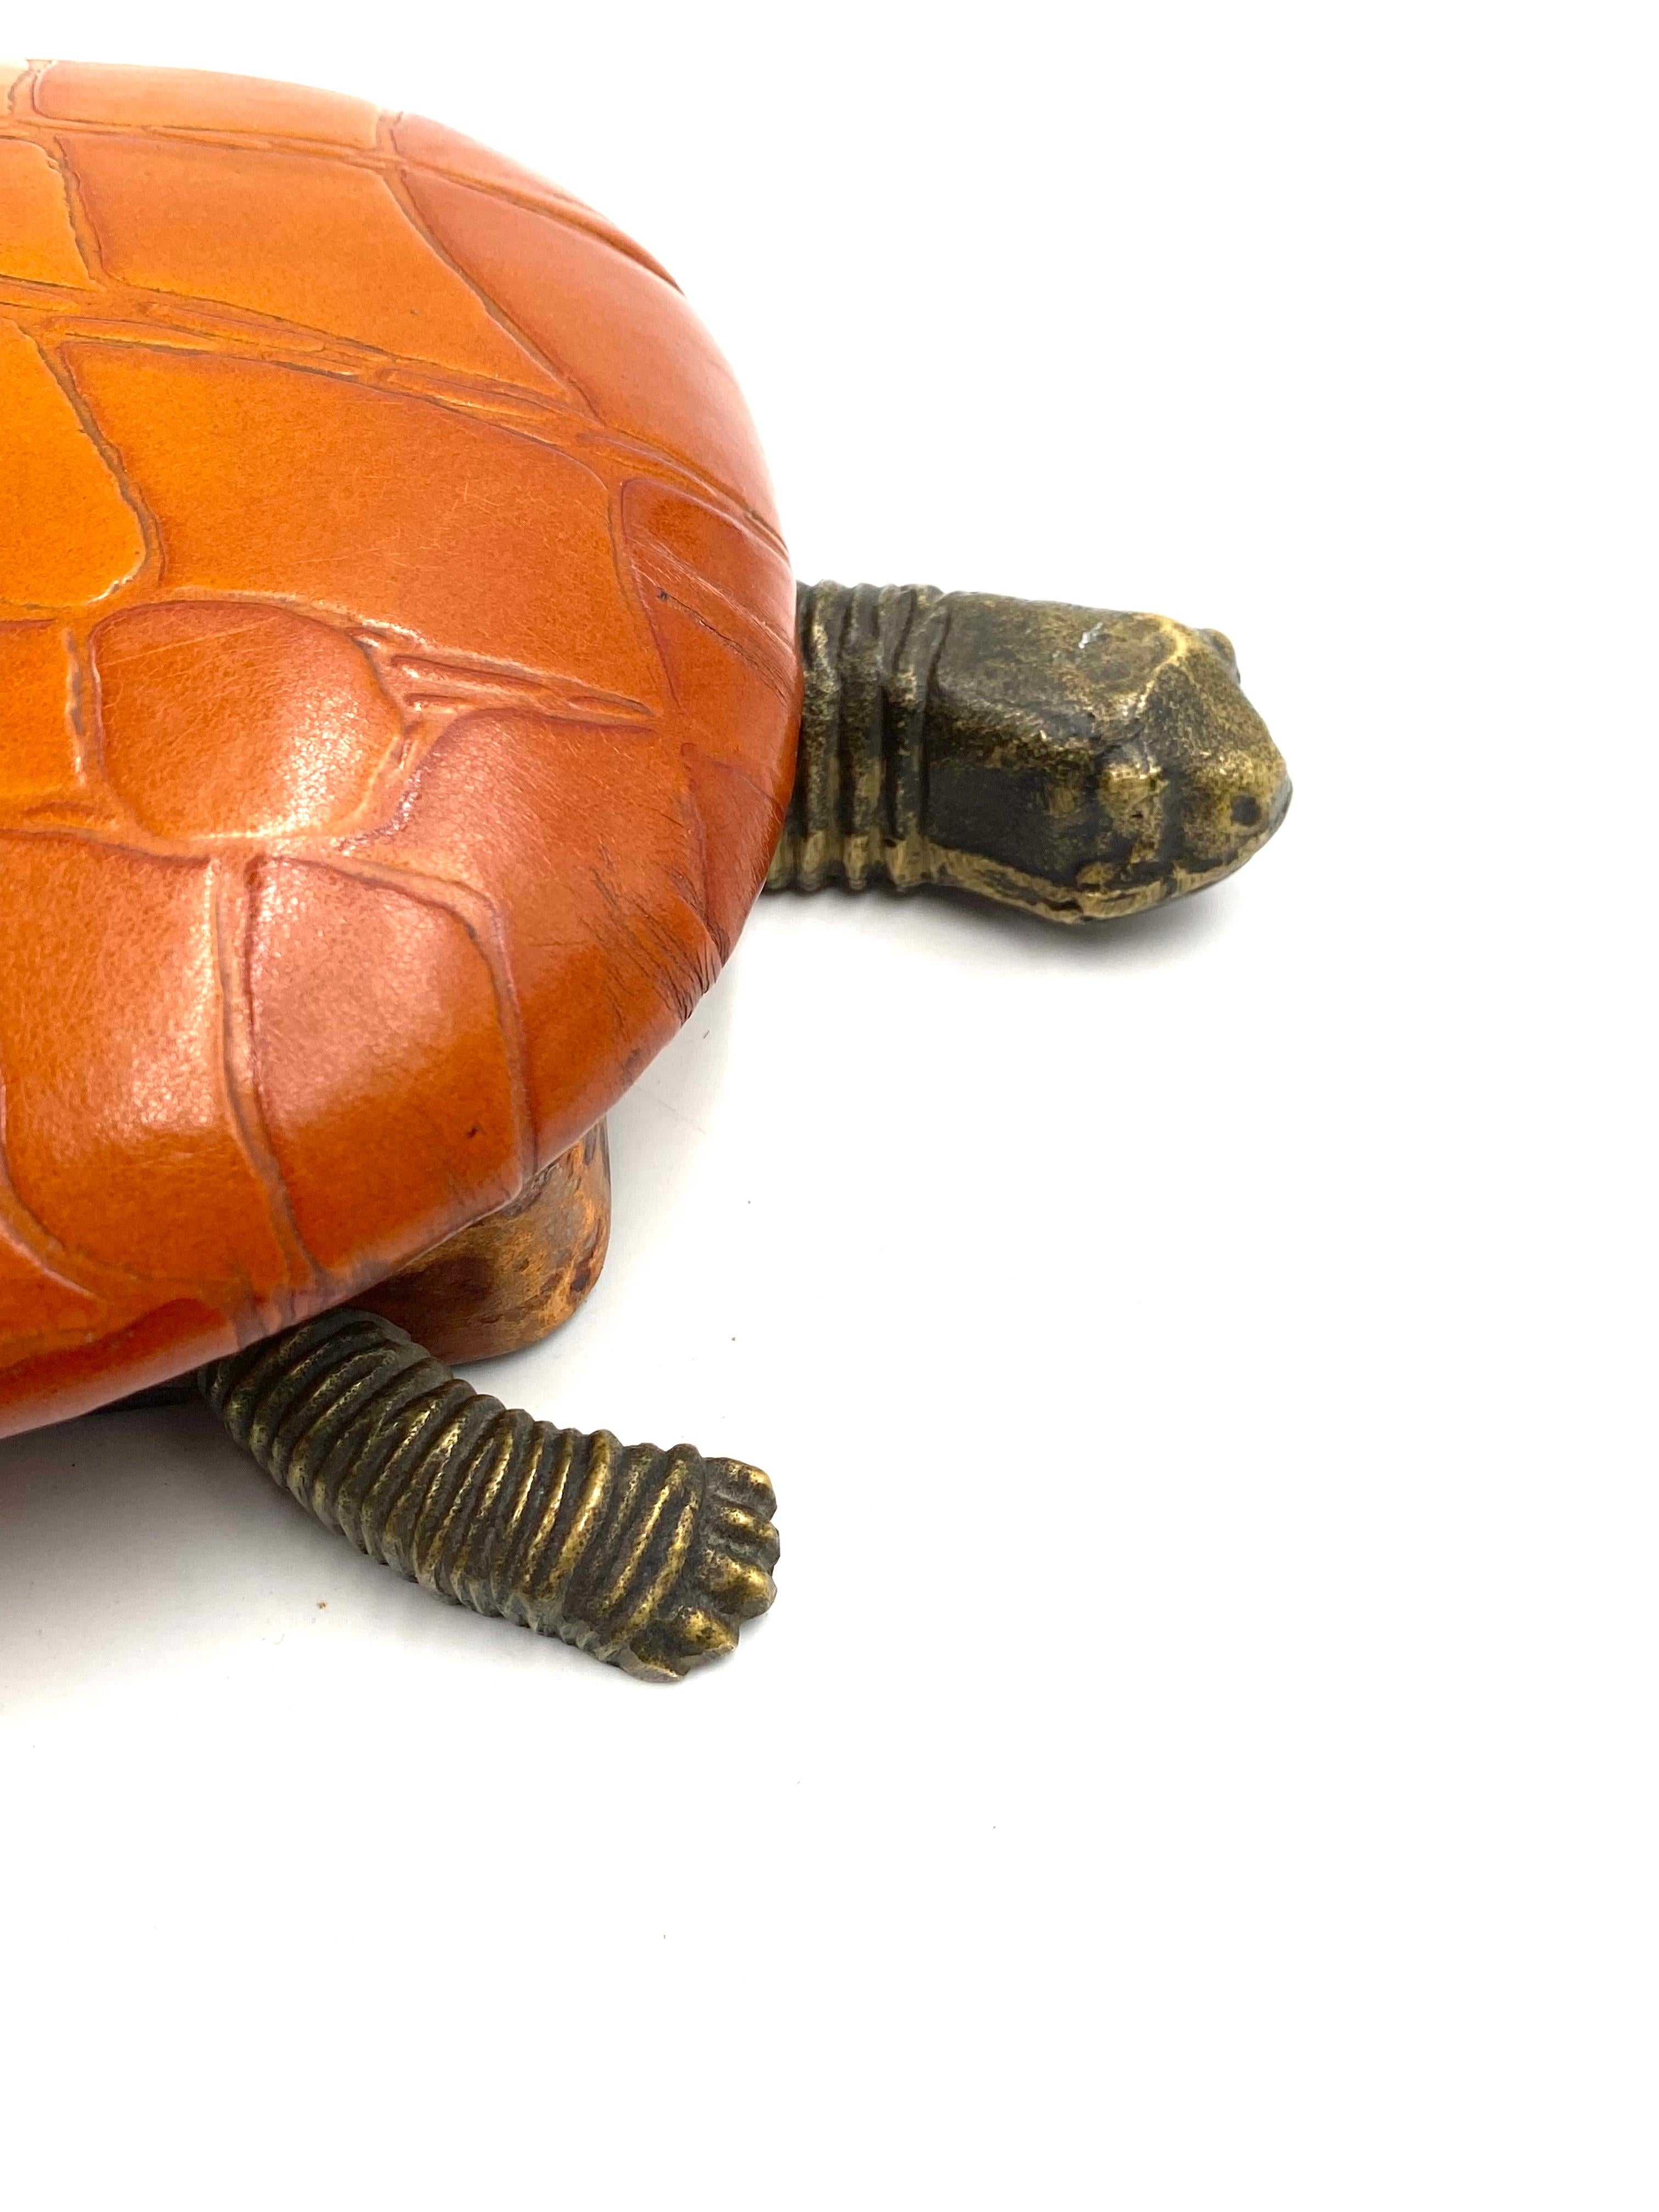 Turtle Shaped Leather and Bronze Jewelry Box, France 1950s For Sale 10